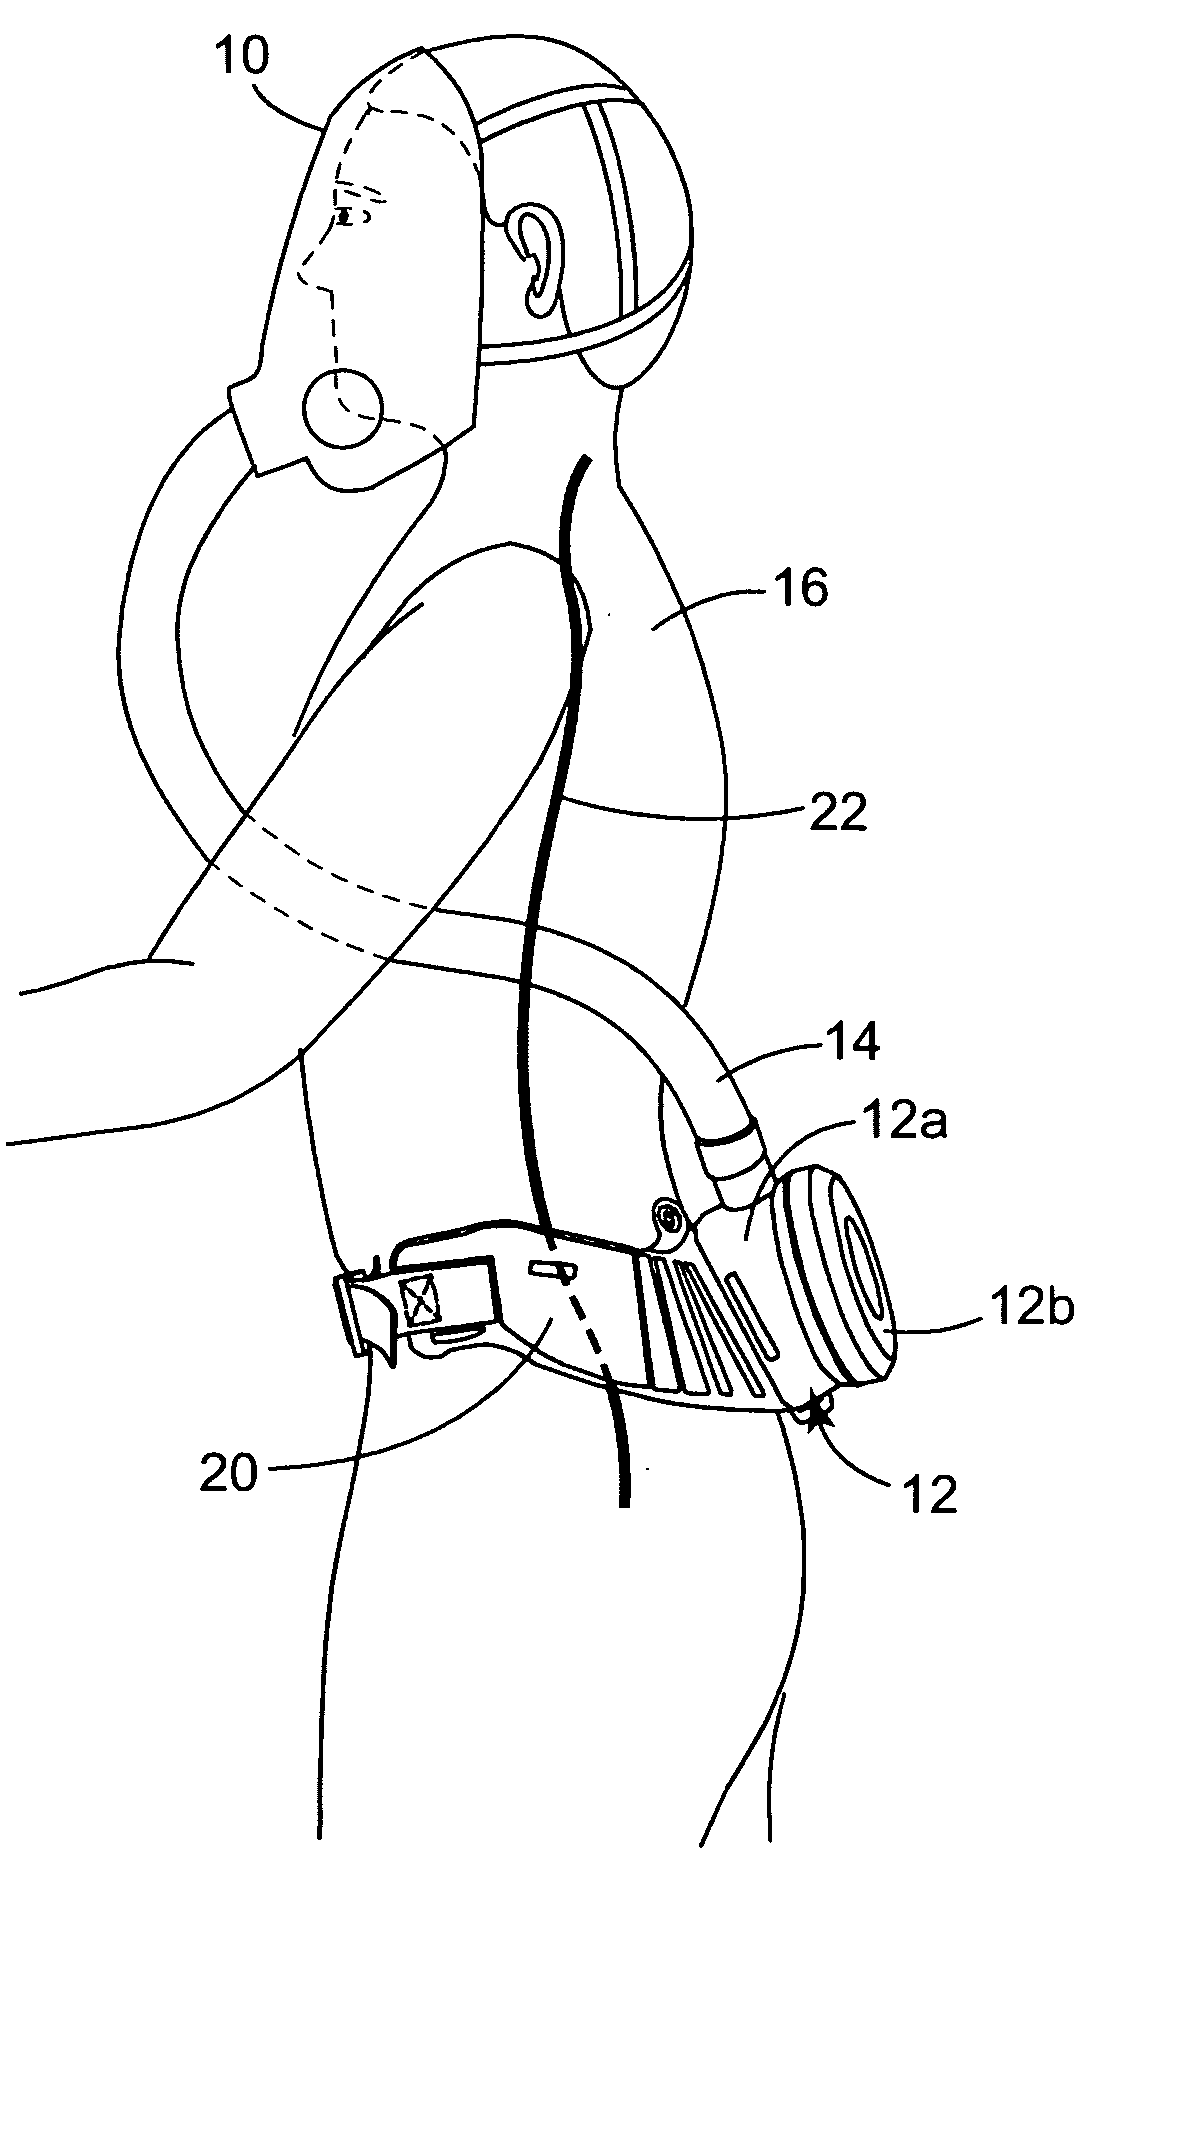 Respiratory component mounting assembly